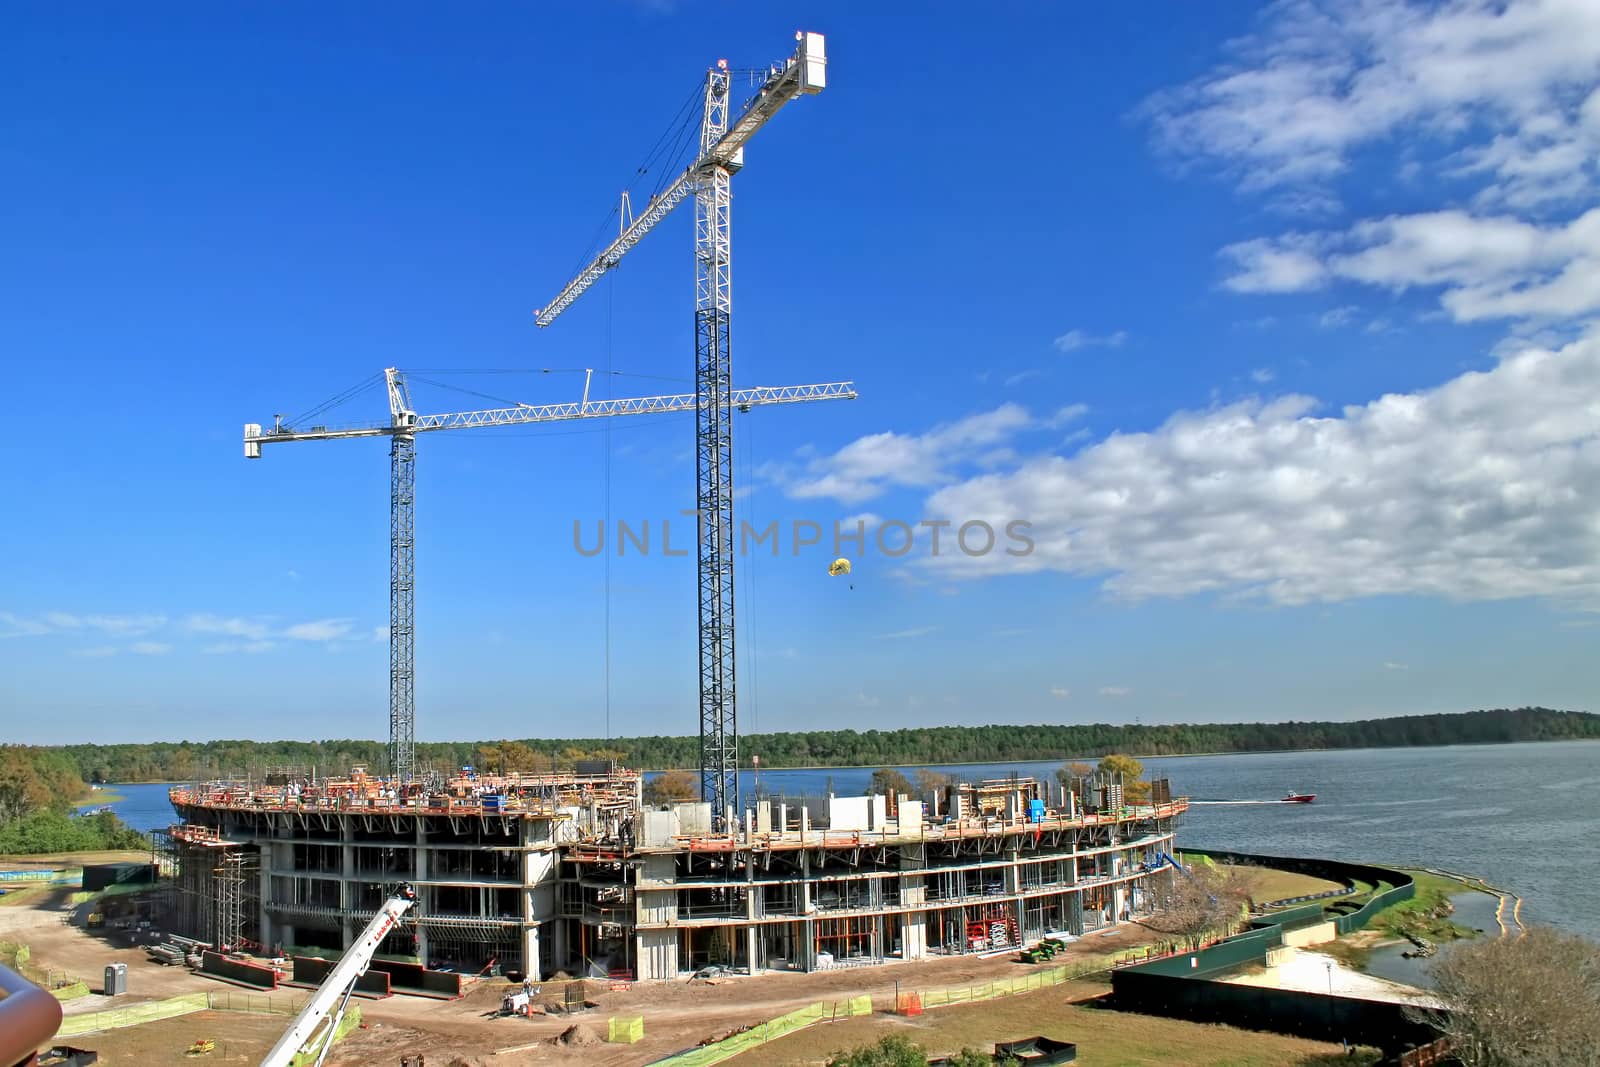 The construction of a building with 2 cranes